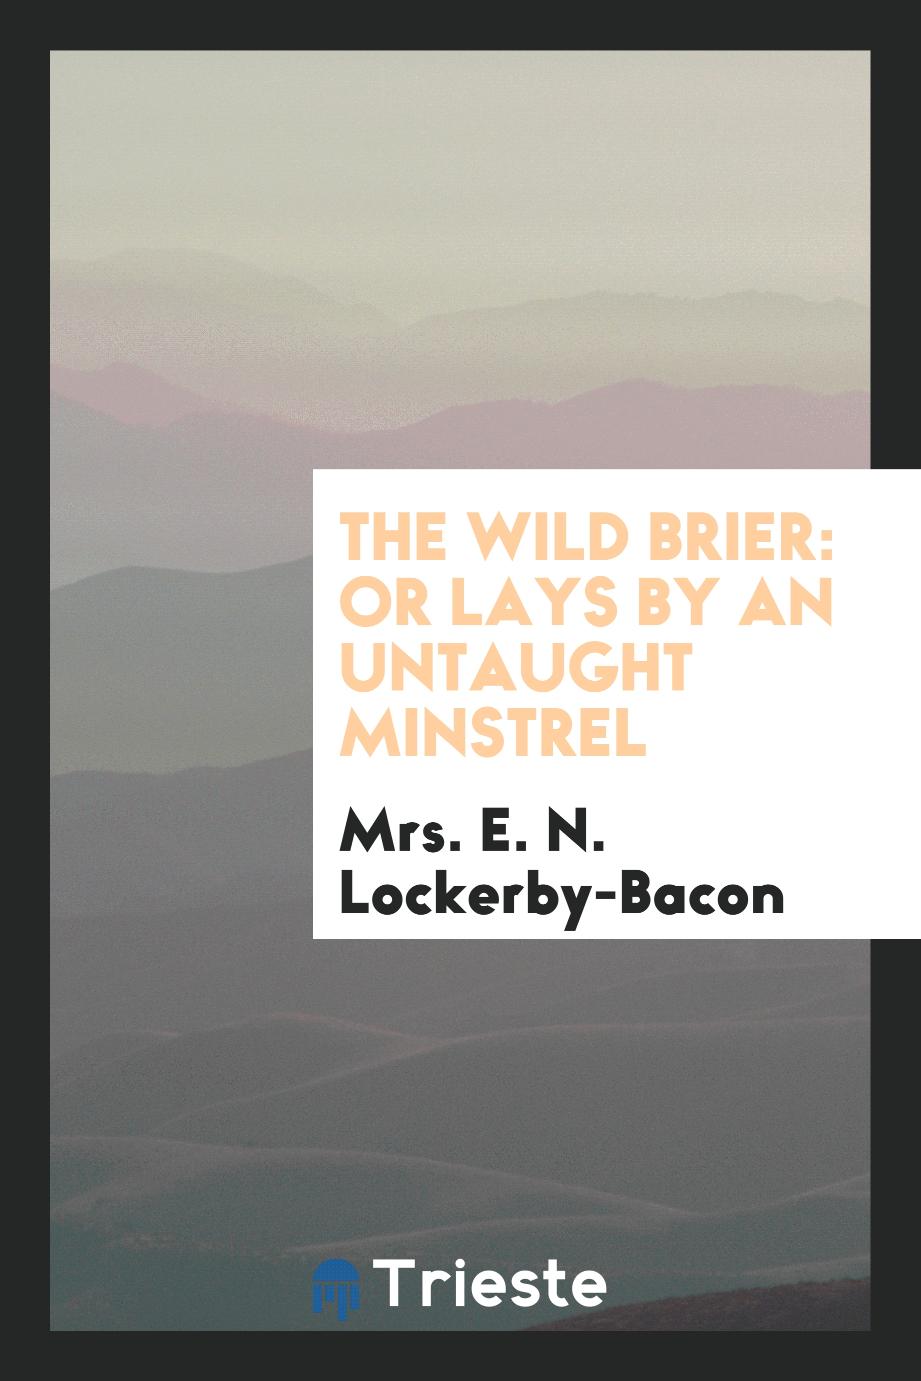 The Wild Brier: Or Lays by an Untaught Minstrel